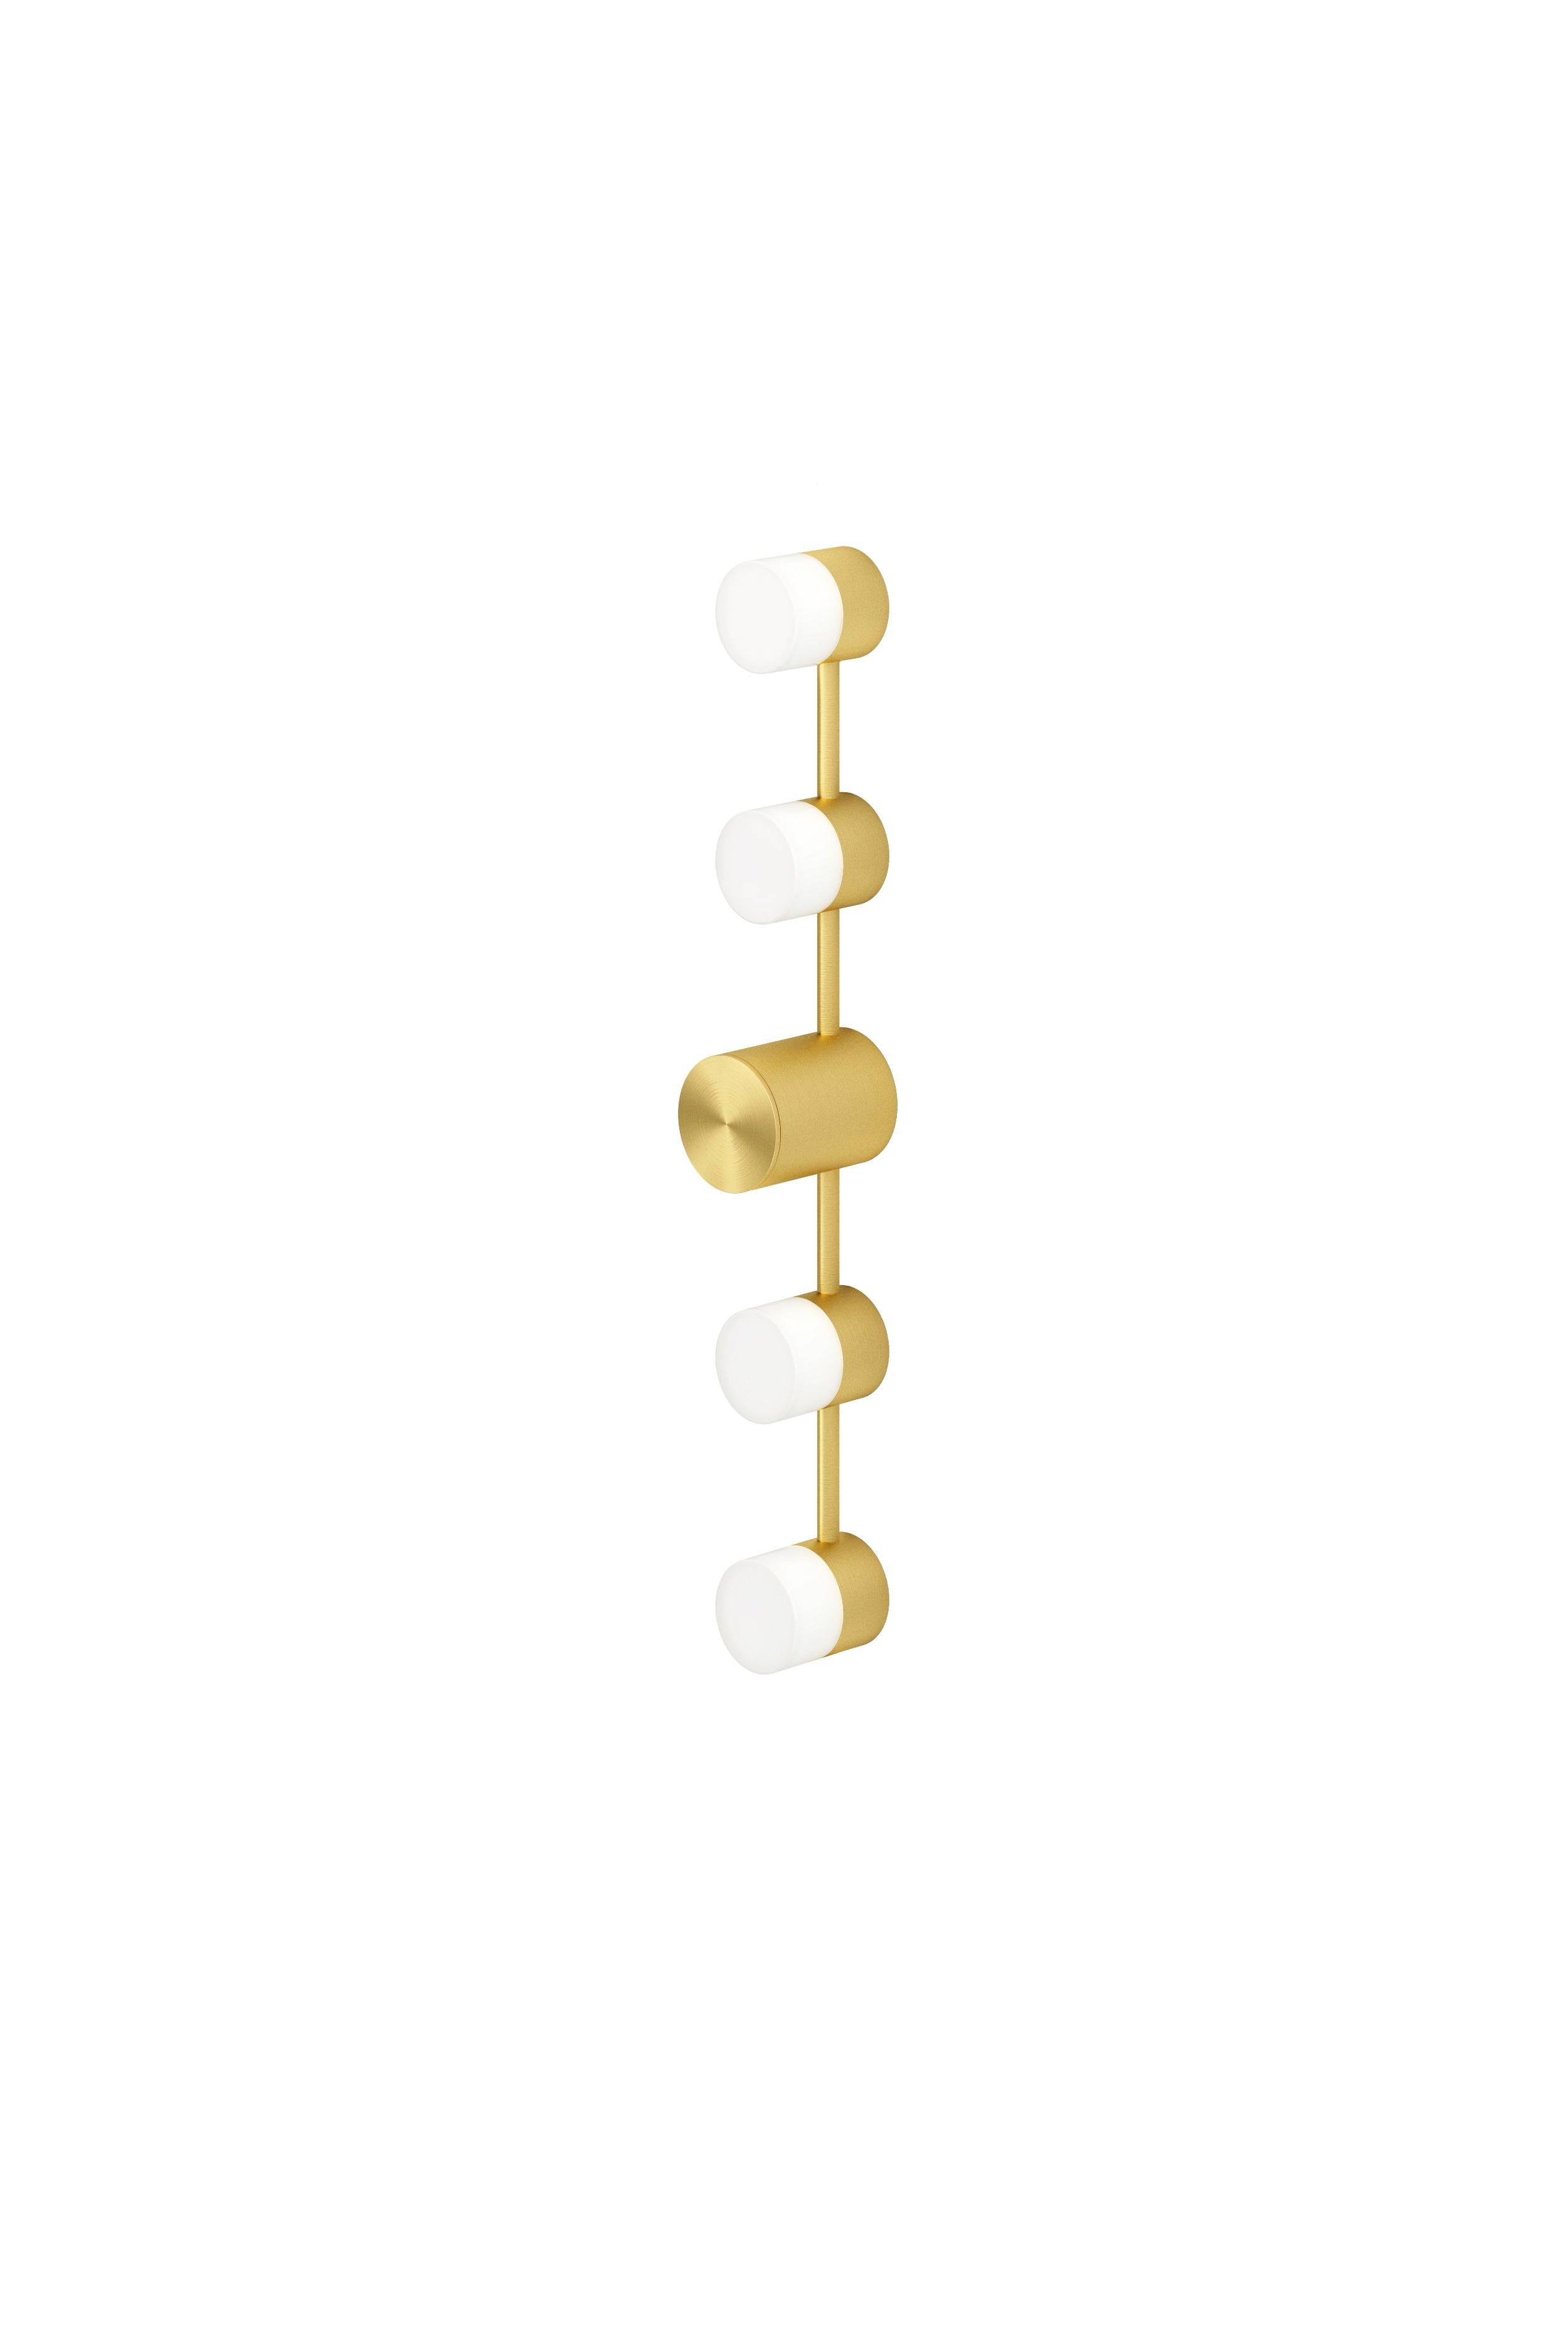 IP backstage C4 satin brass wall light by Emilie Cathelineau
Dimensions: D50.3 x W6.3 X H9.2 cm
Materials: solid brass, satin brass
Others finishes and dimensions available.

All our lamps can be wired according to each country. If sold to the